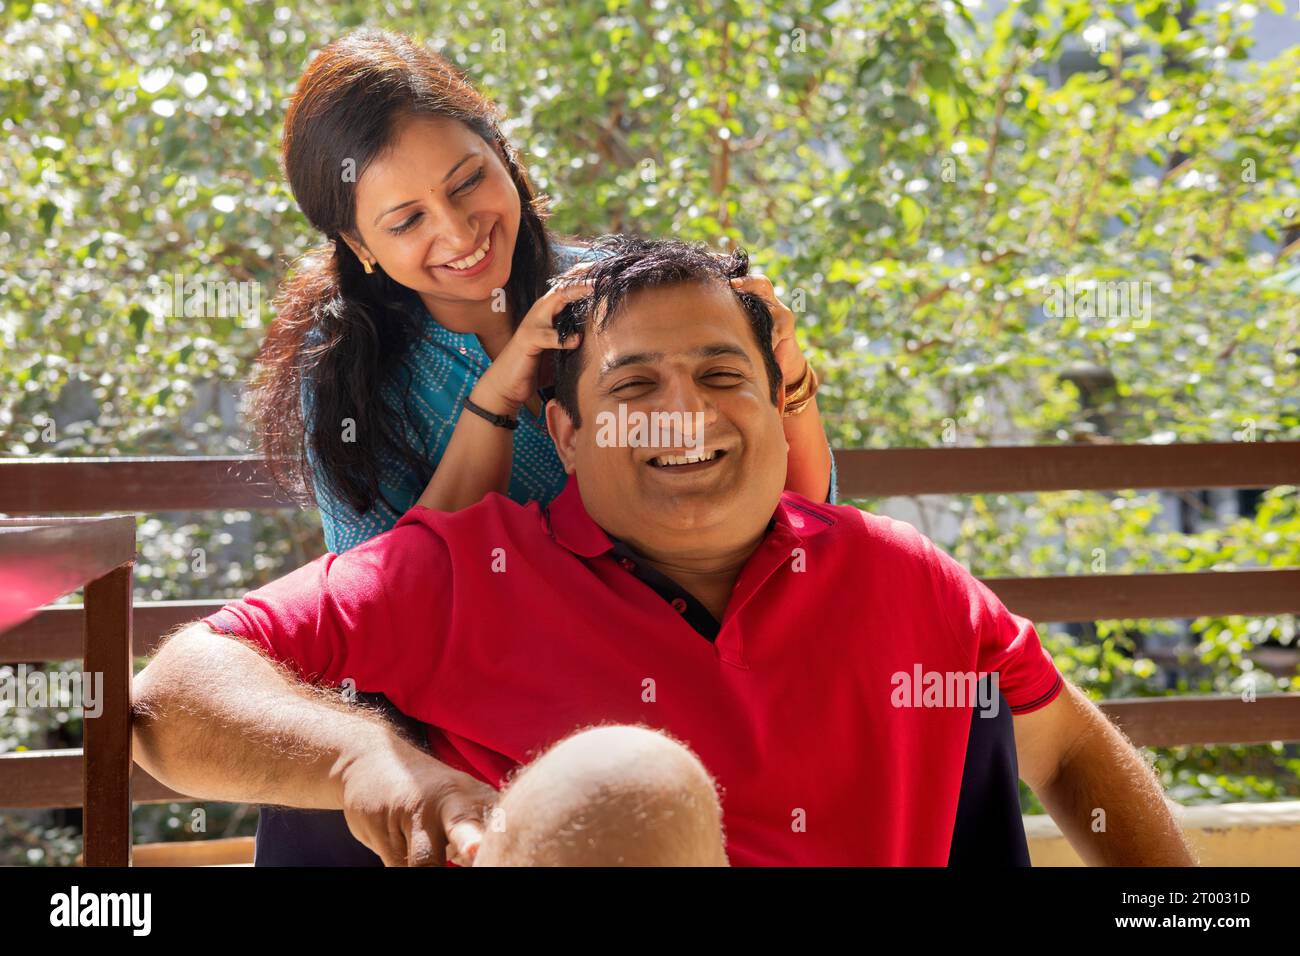 Woman Giving Head Message To Her Husband On Balcony Stock Photo Alamy